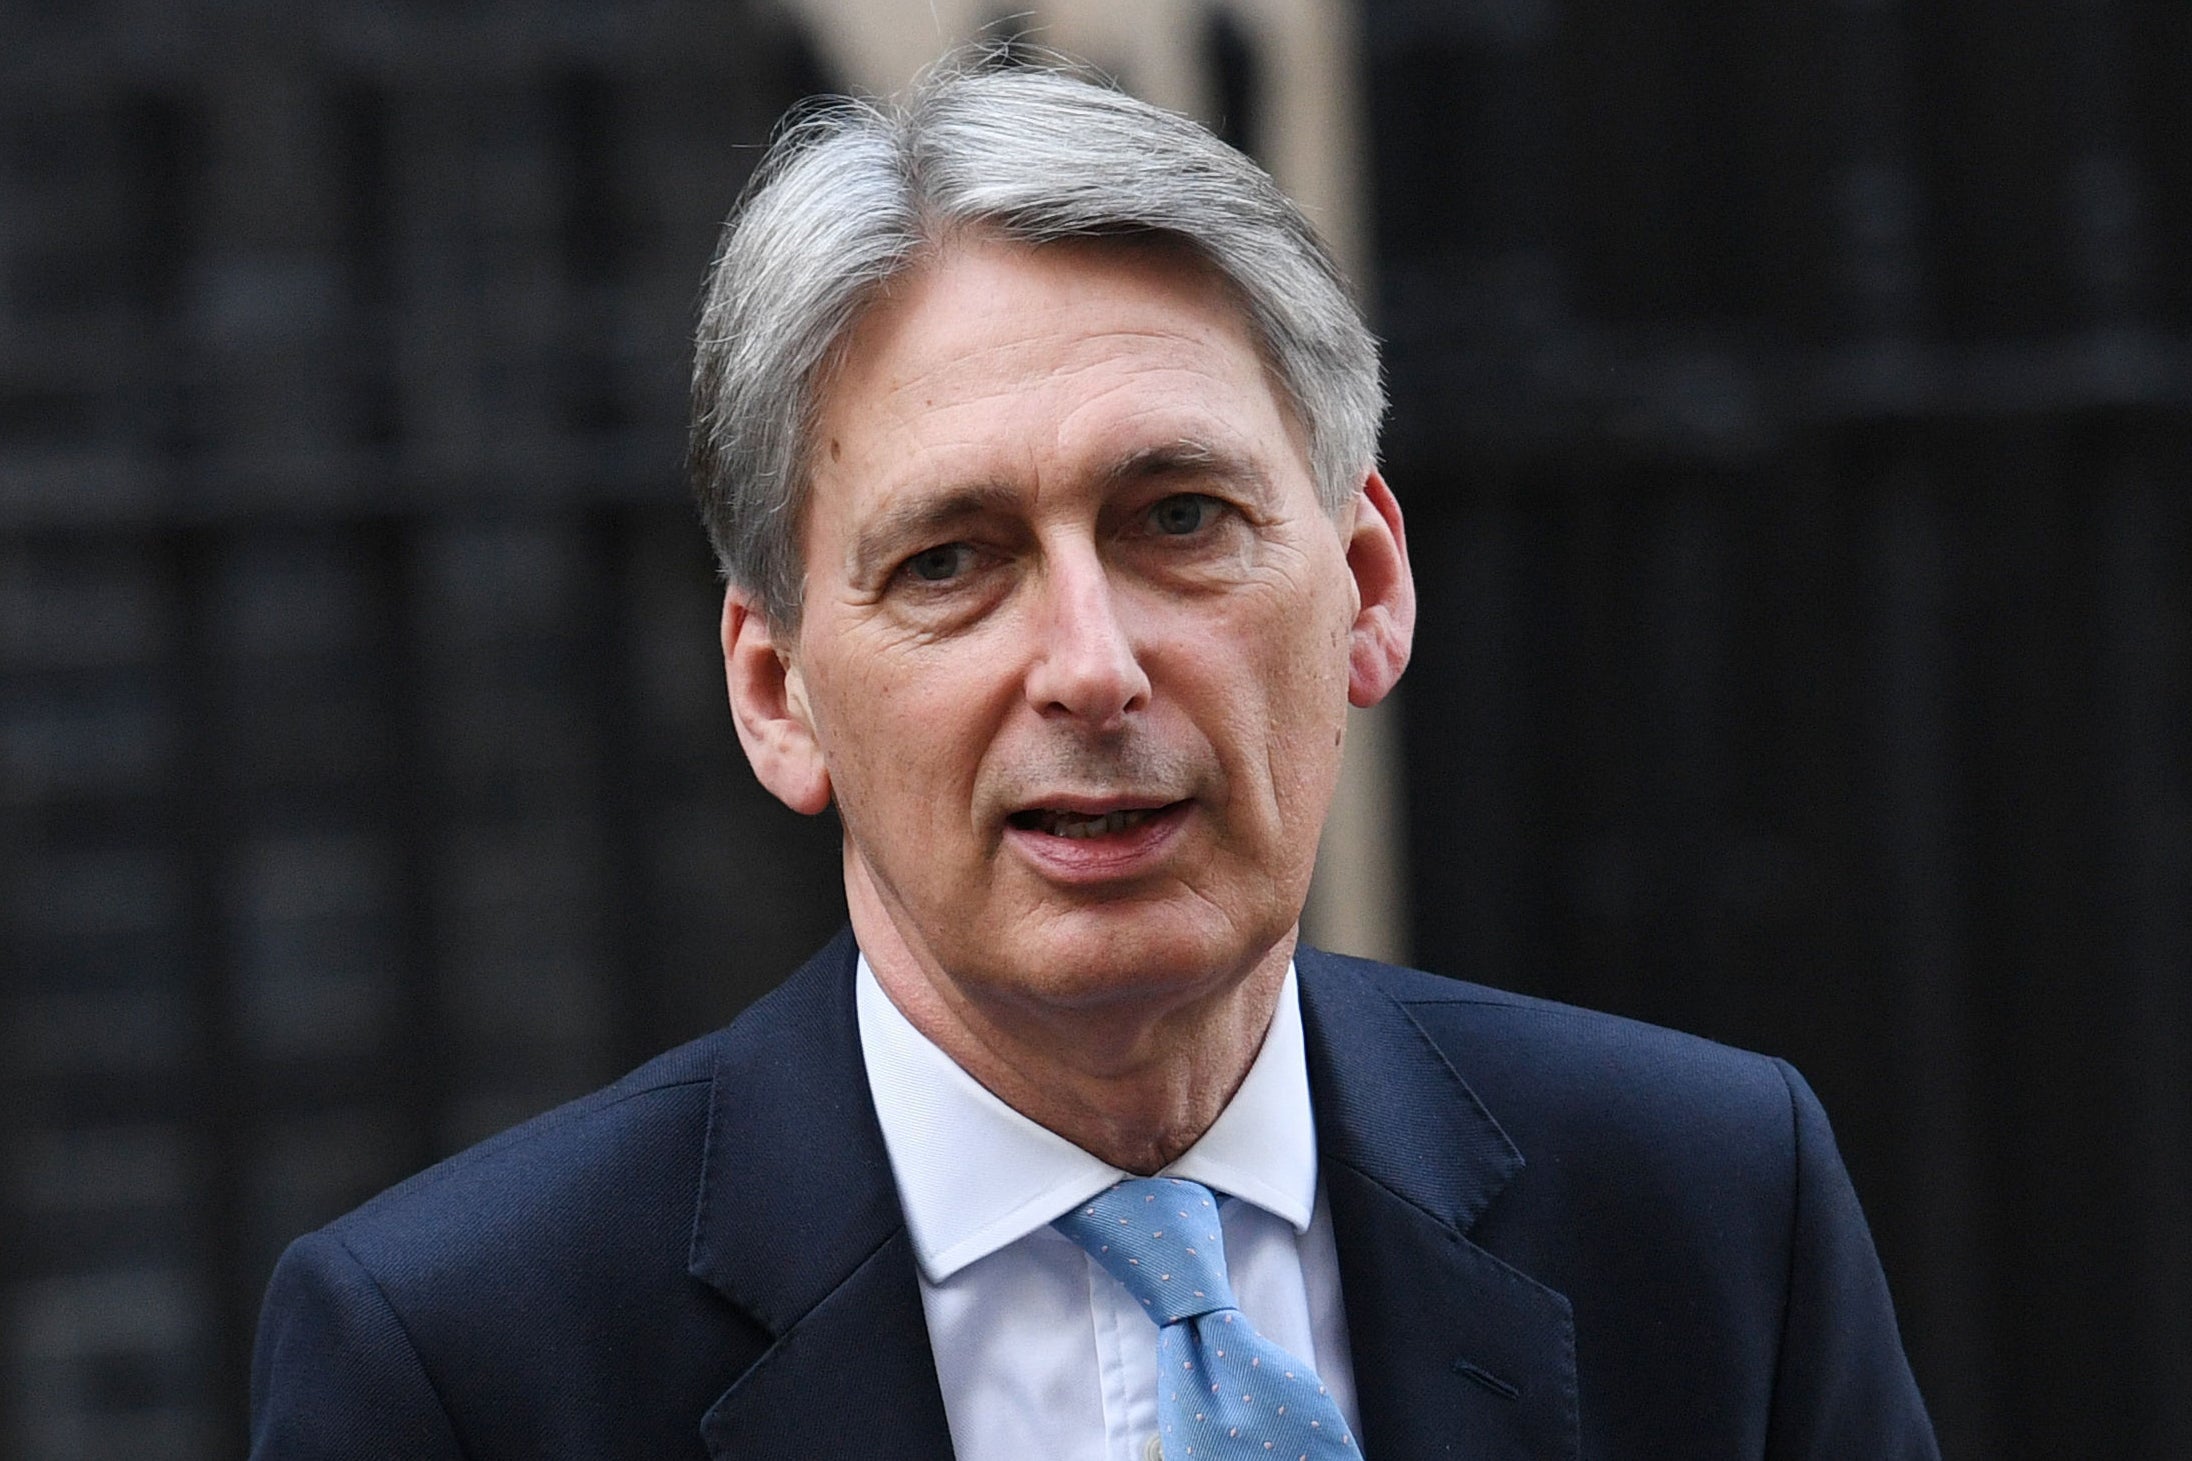 Philip Hammond was asked why Cabinet colleagues are ‘going for you’